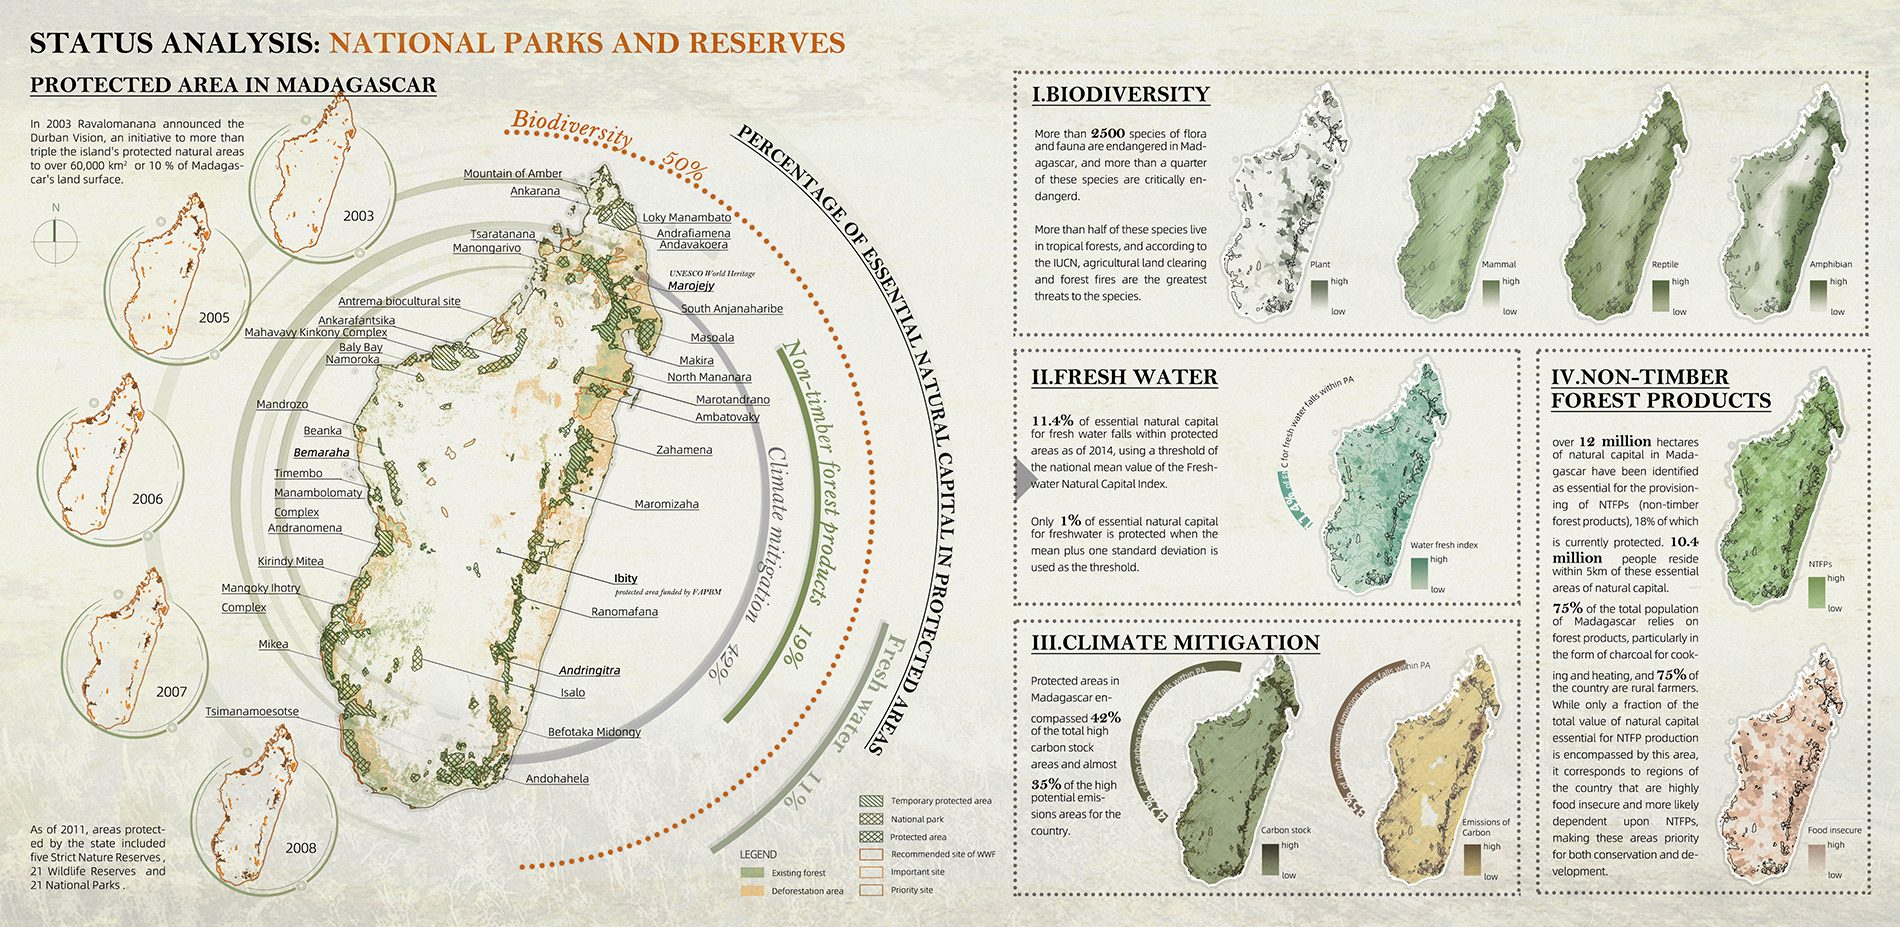 Status Analysis: National Parks and Reserves